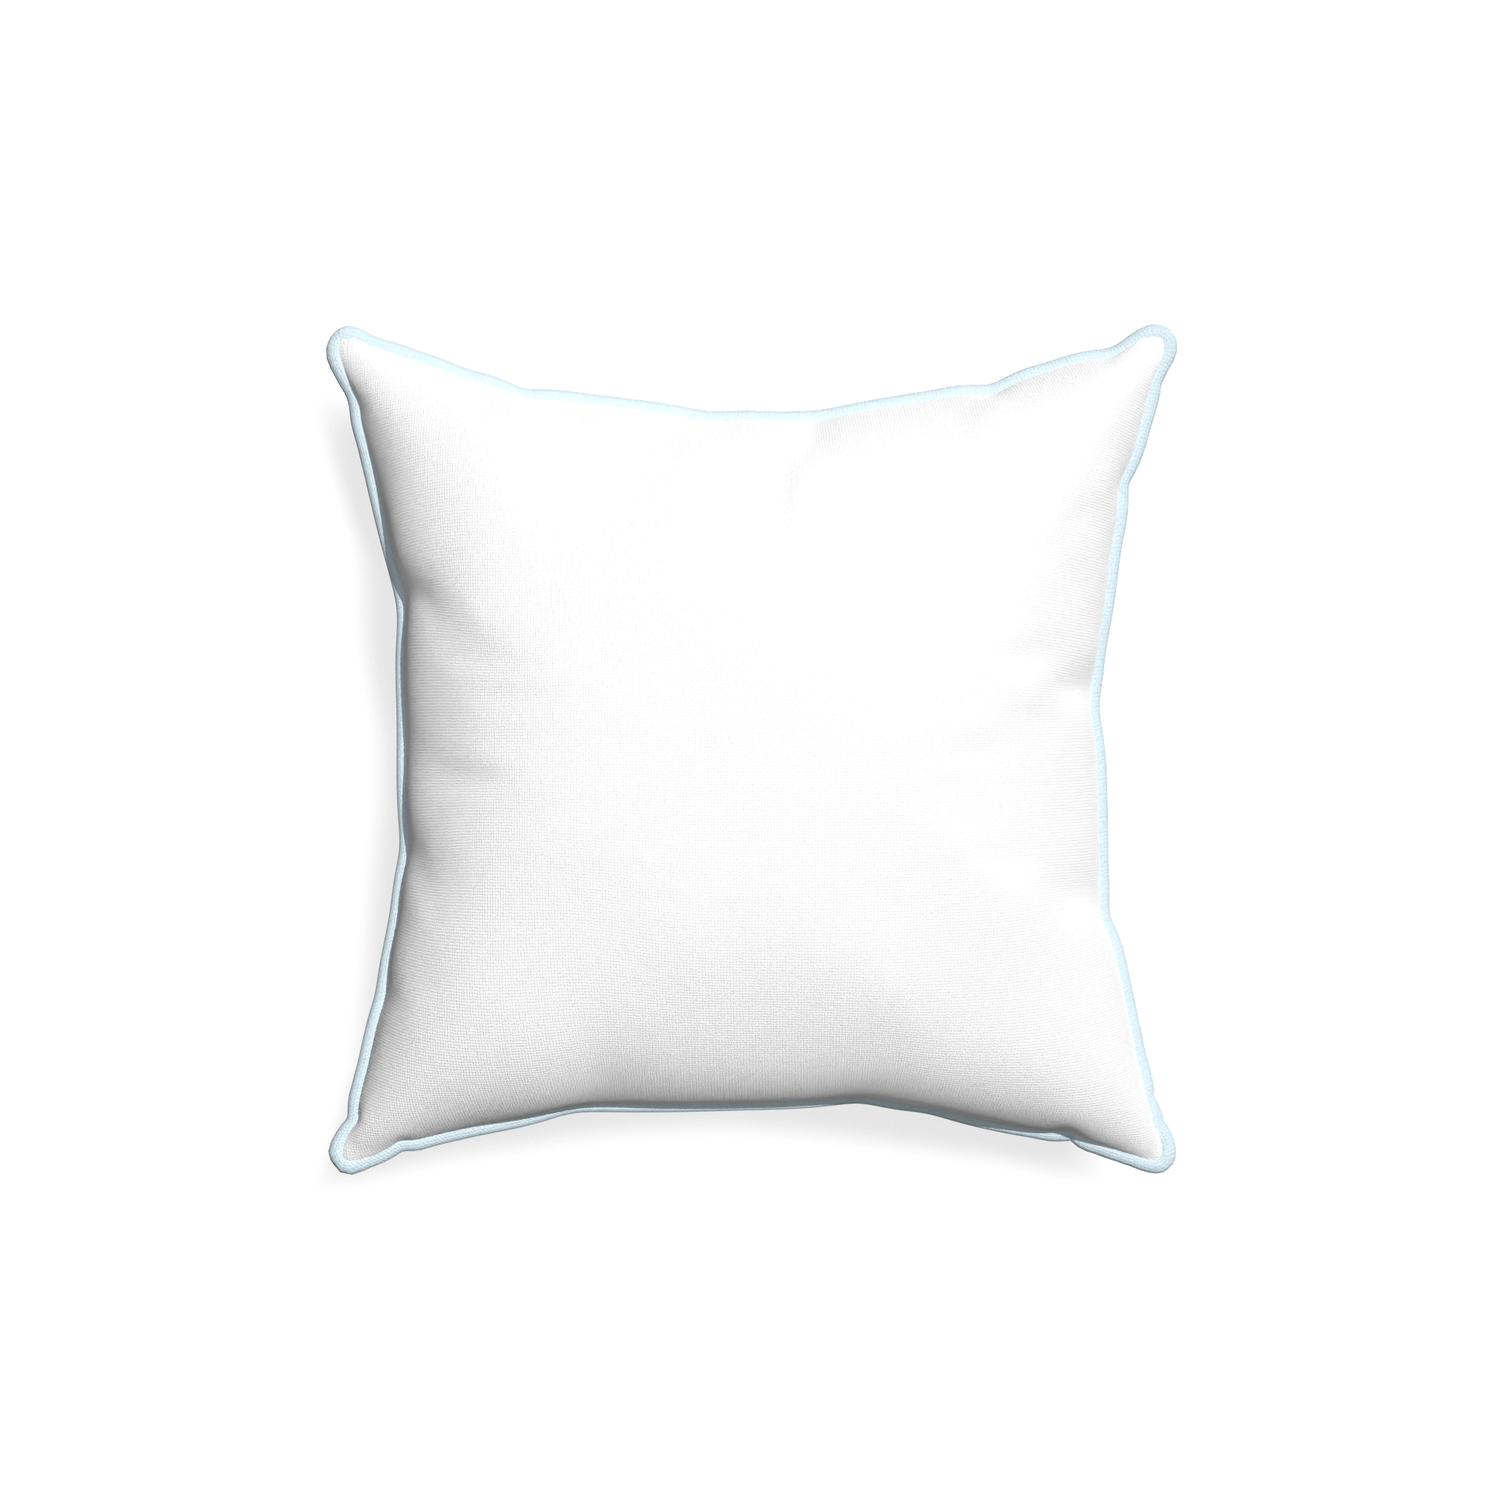 18-square snow custom white cottonpillow with powder piping on white background